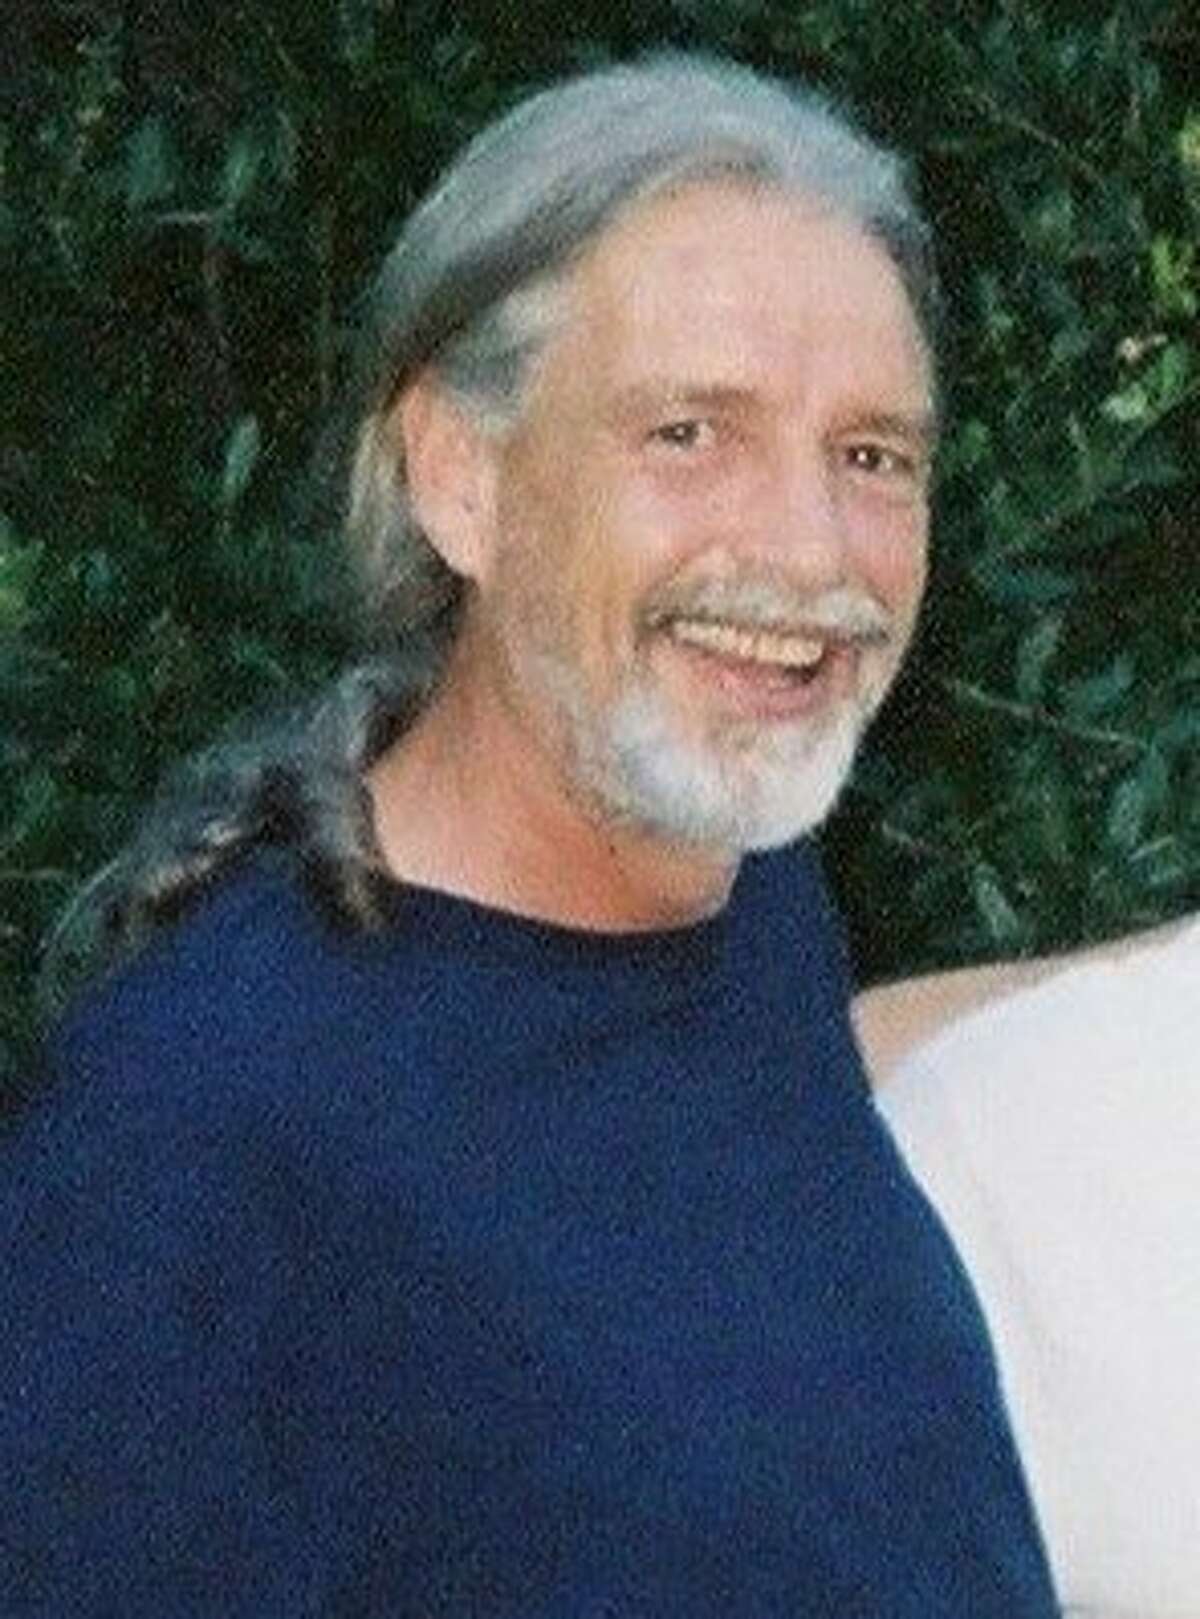 Brian Egg, 65, went missing from his San Francisco home where police later discovered a torso in a fish tank. Investigators are working to determine whether the dead body is Egg.